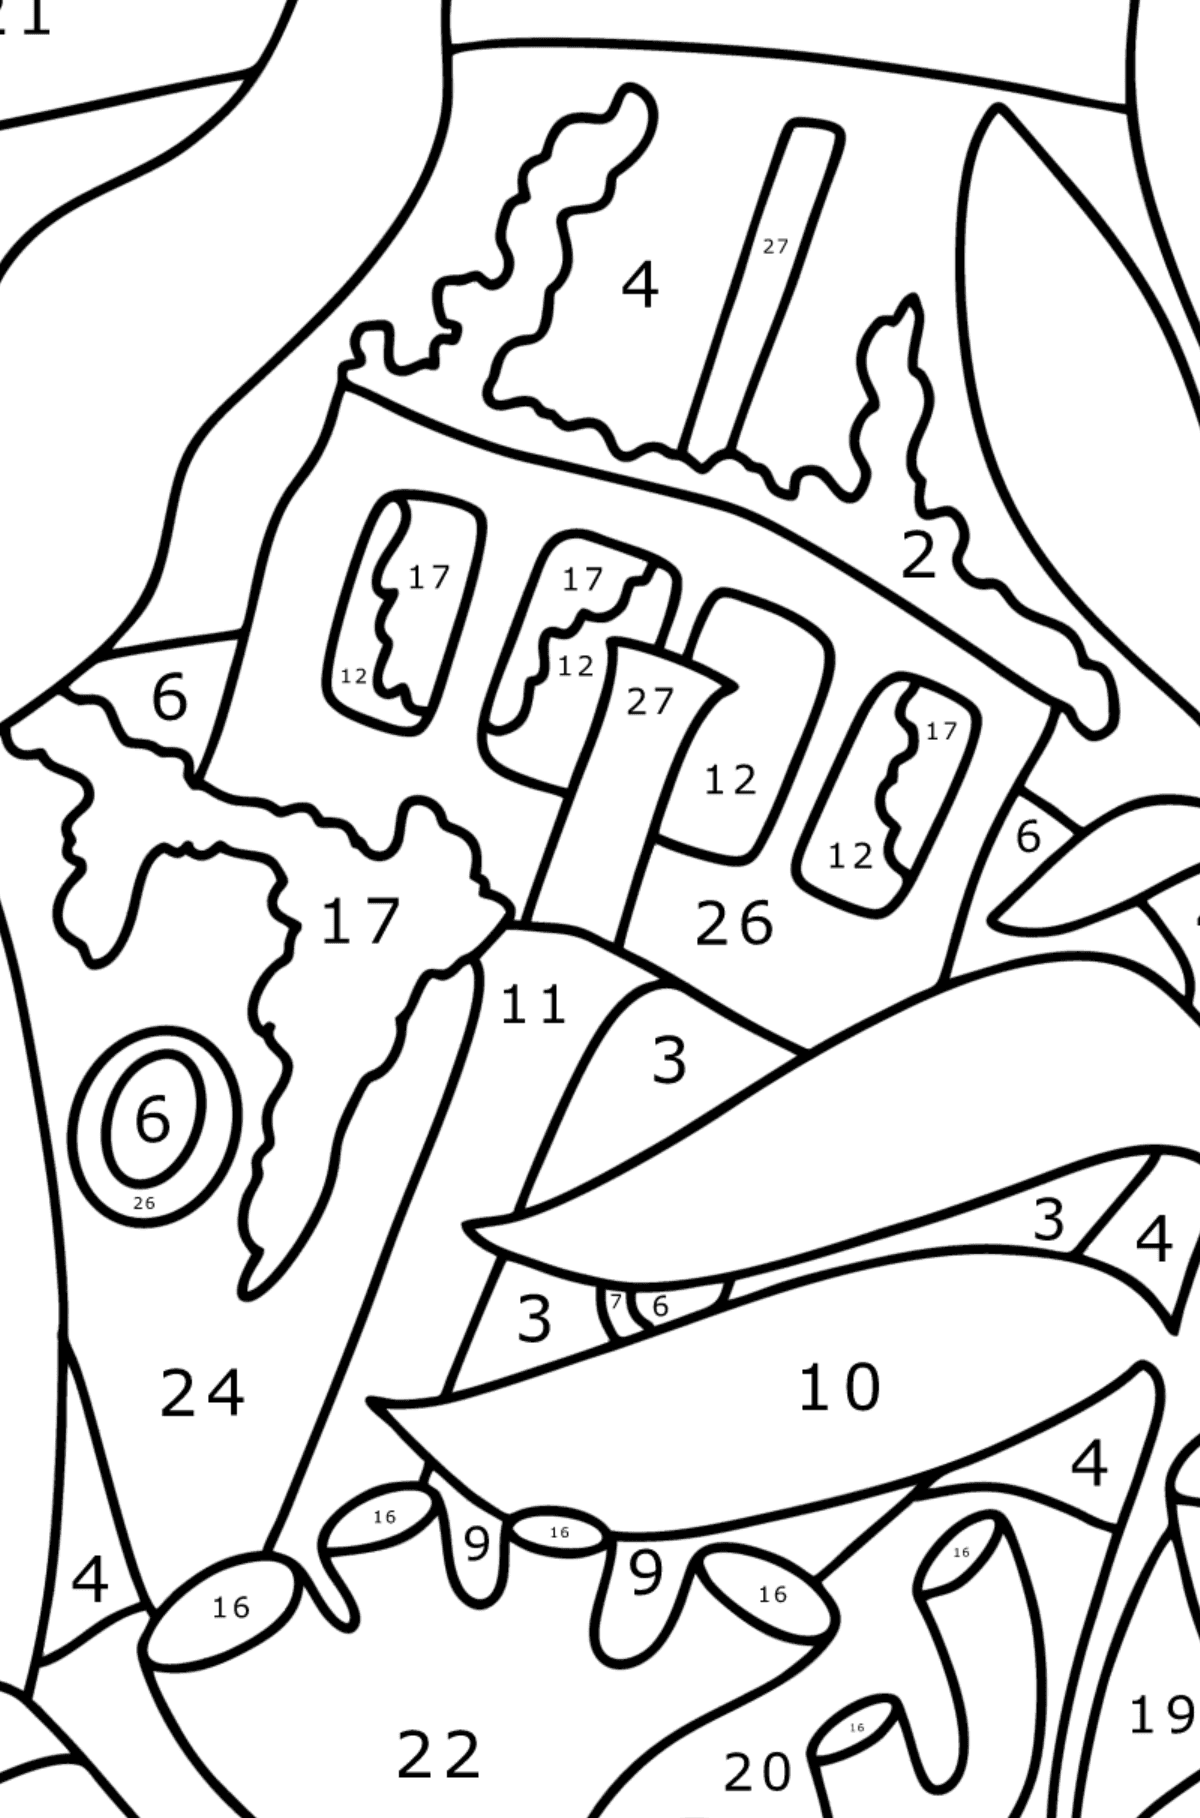 Sunken ship coloring page - Coloring by Numbers for Kids